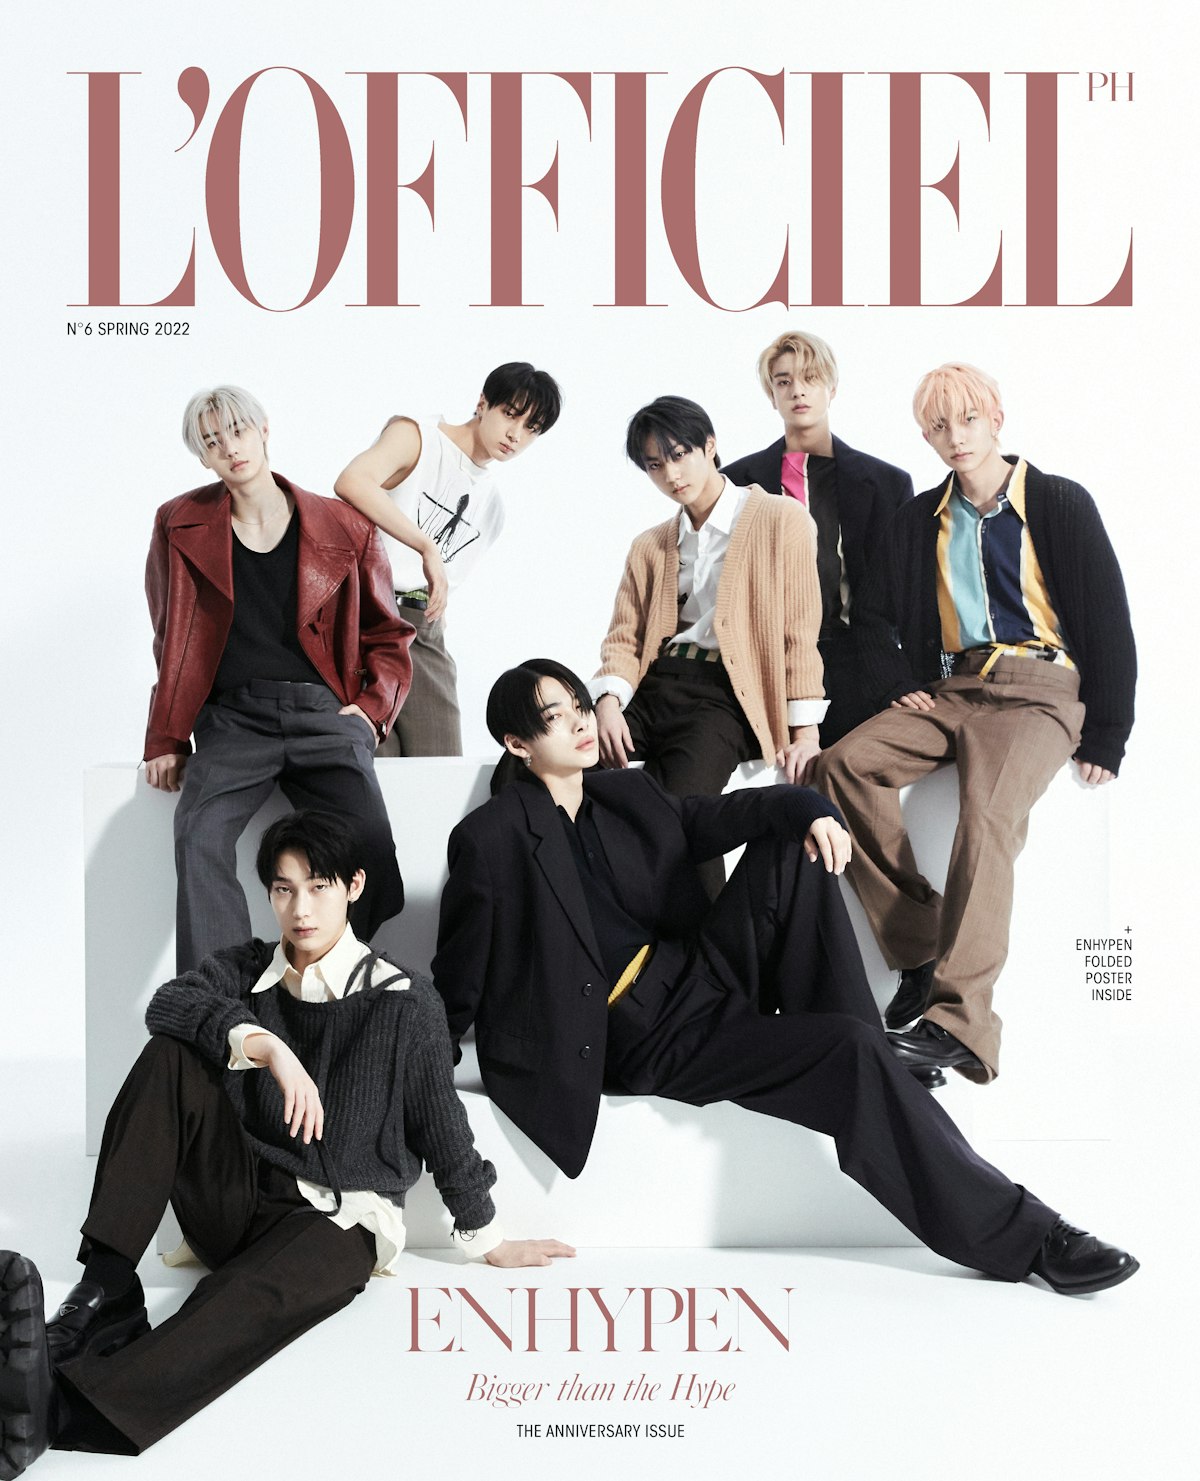 L'Officiel Philippines on X: #LouisVuitton ushers in the festive